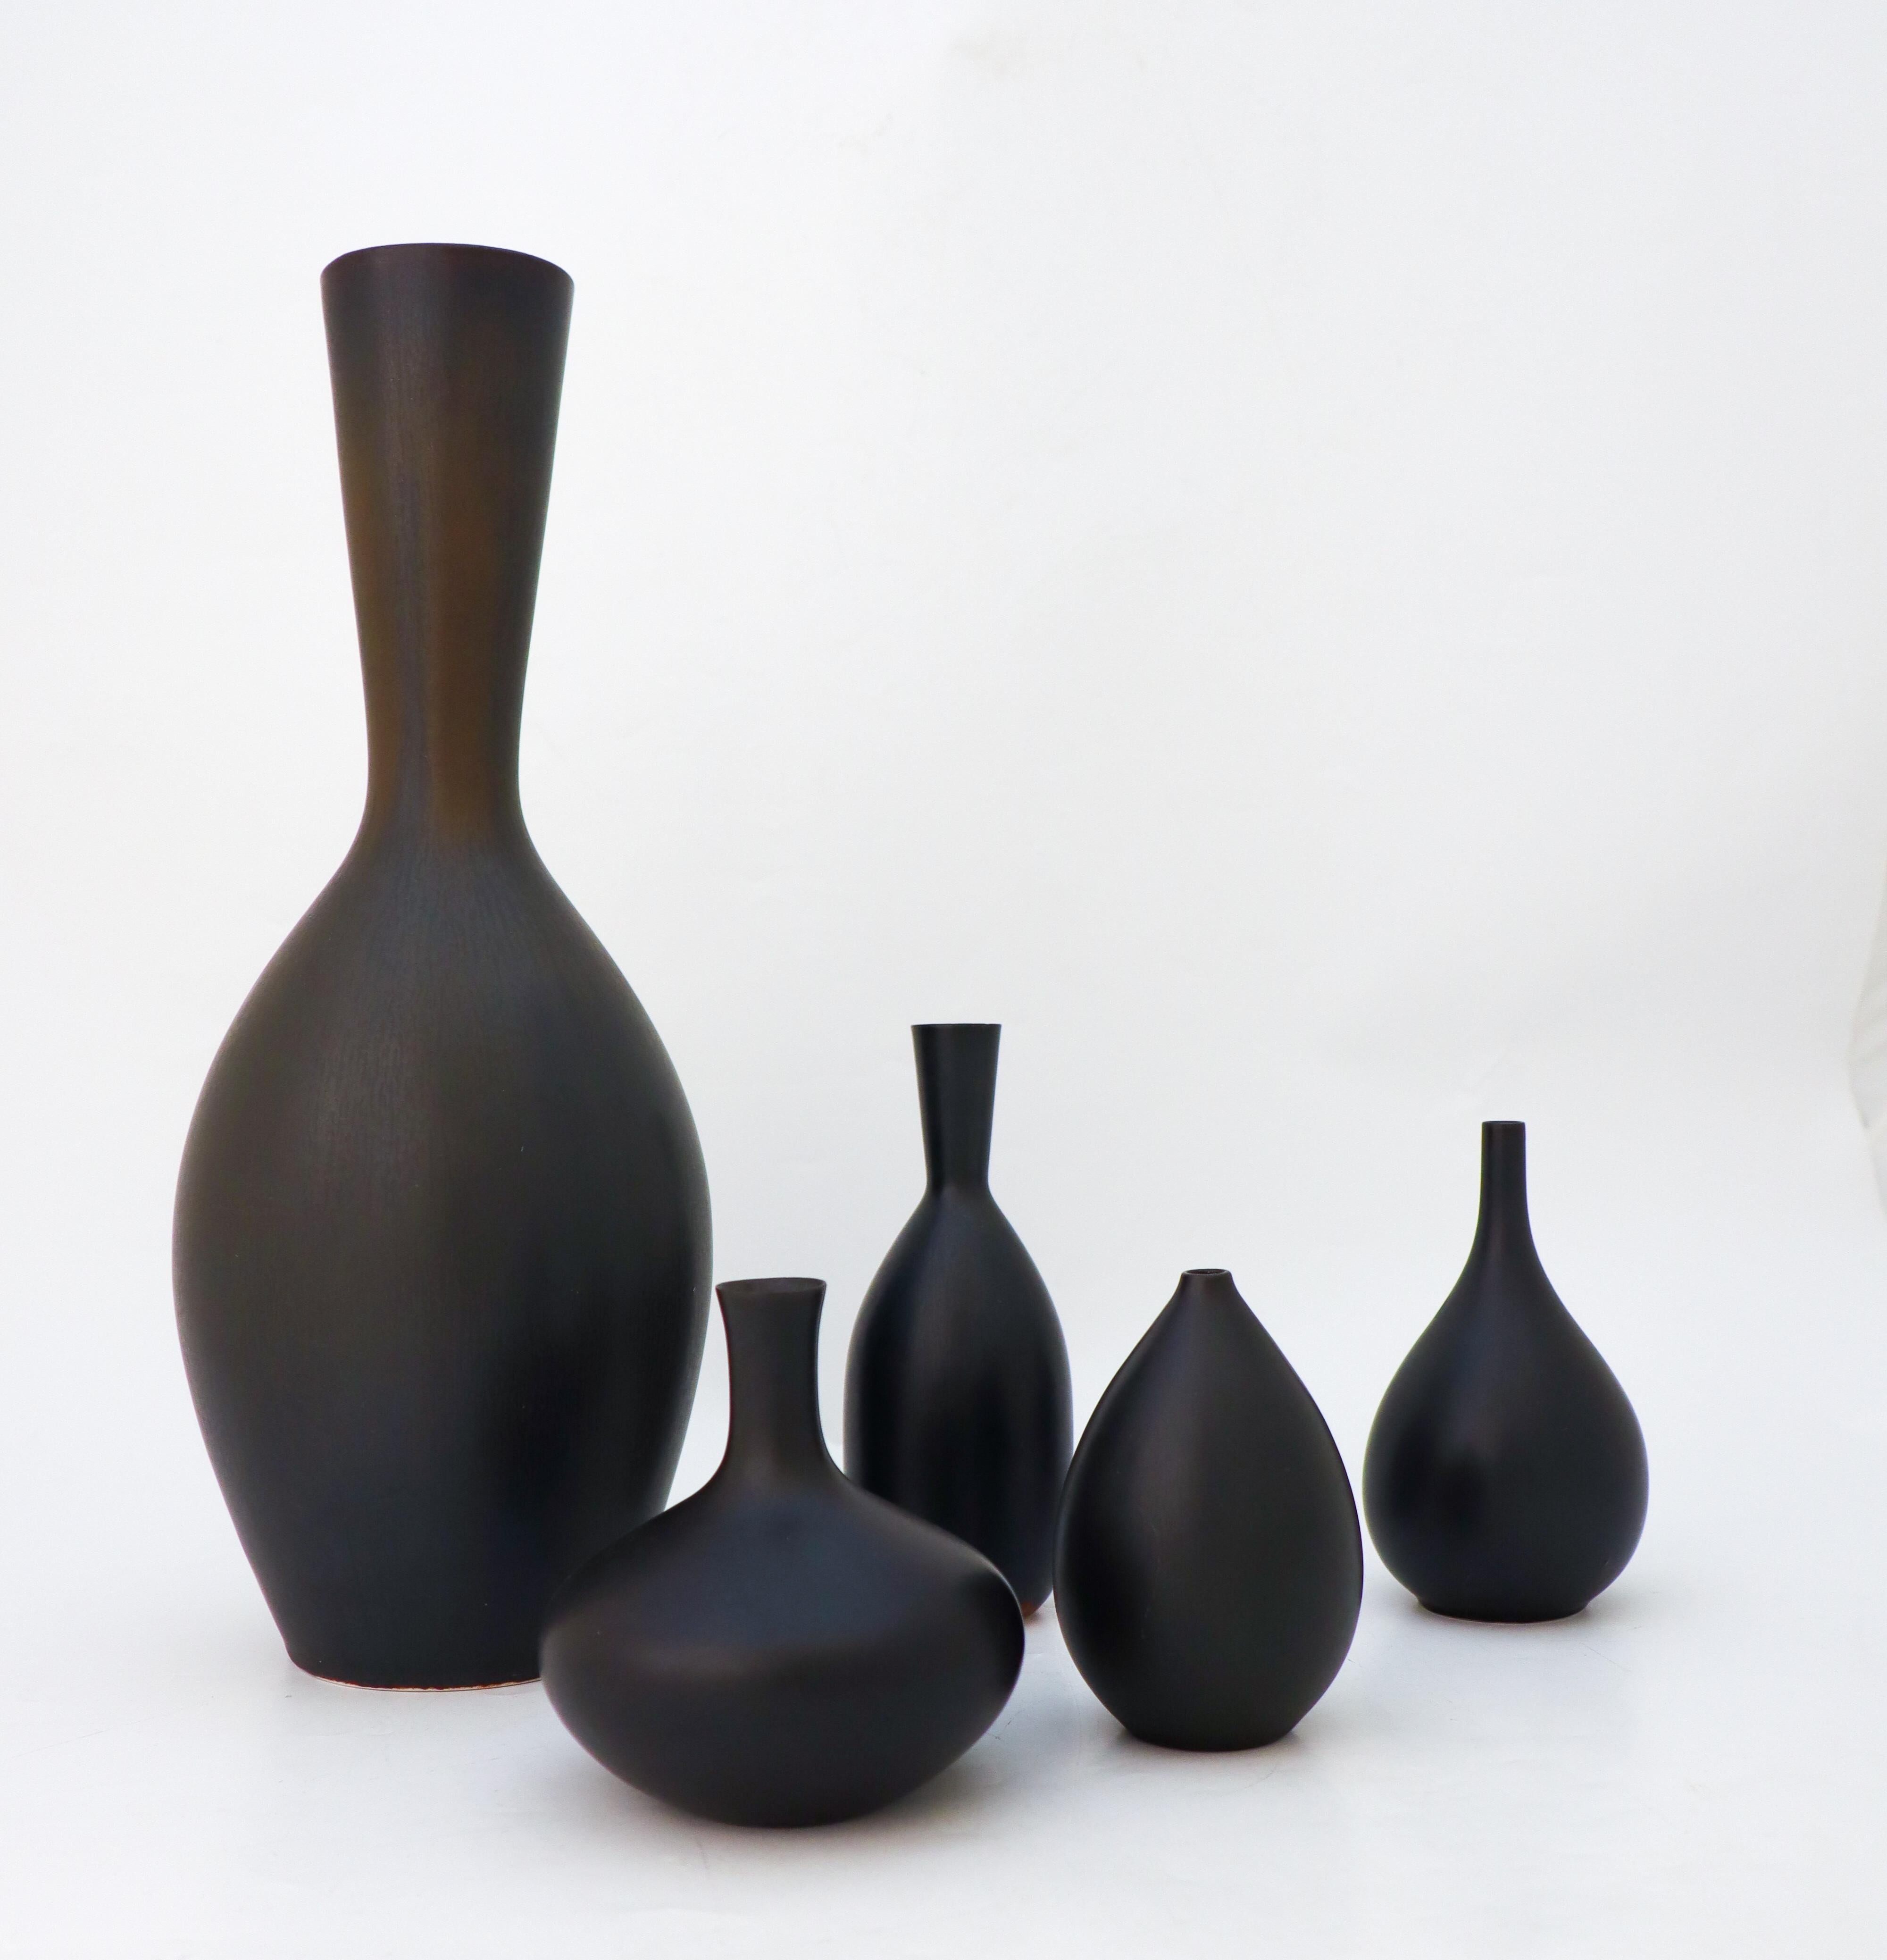 A group of five black vases designed by Carl-Harry Stålhane at Rörstrand. The vases are between 10 - 34 cm high and in excellent condition except from some minor marks and scratches. Three of the vases are marked as 2nd quality and two of them are